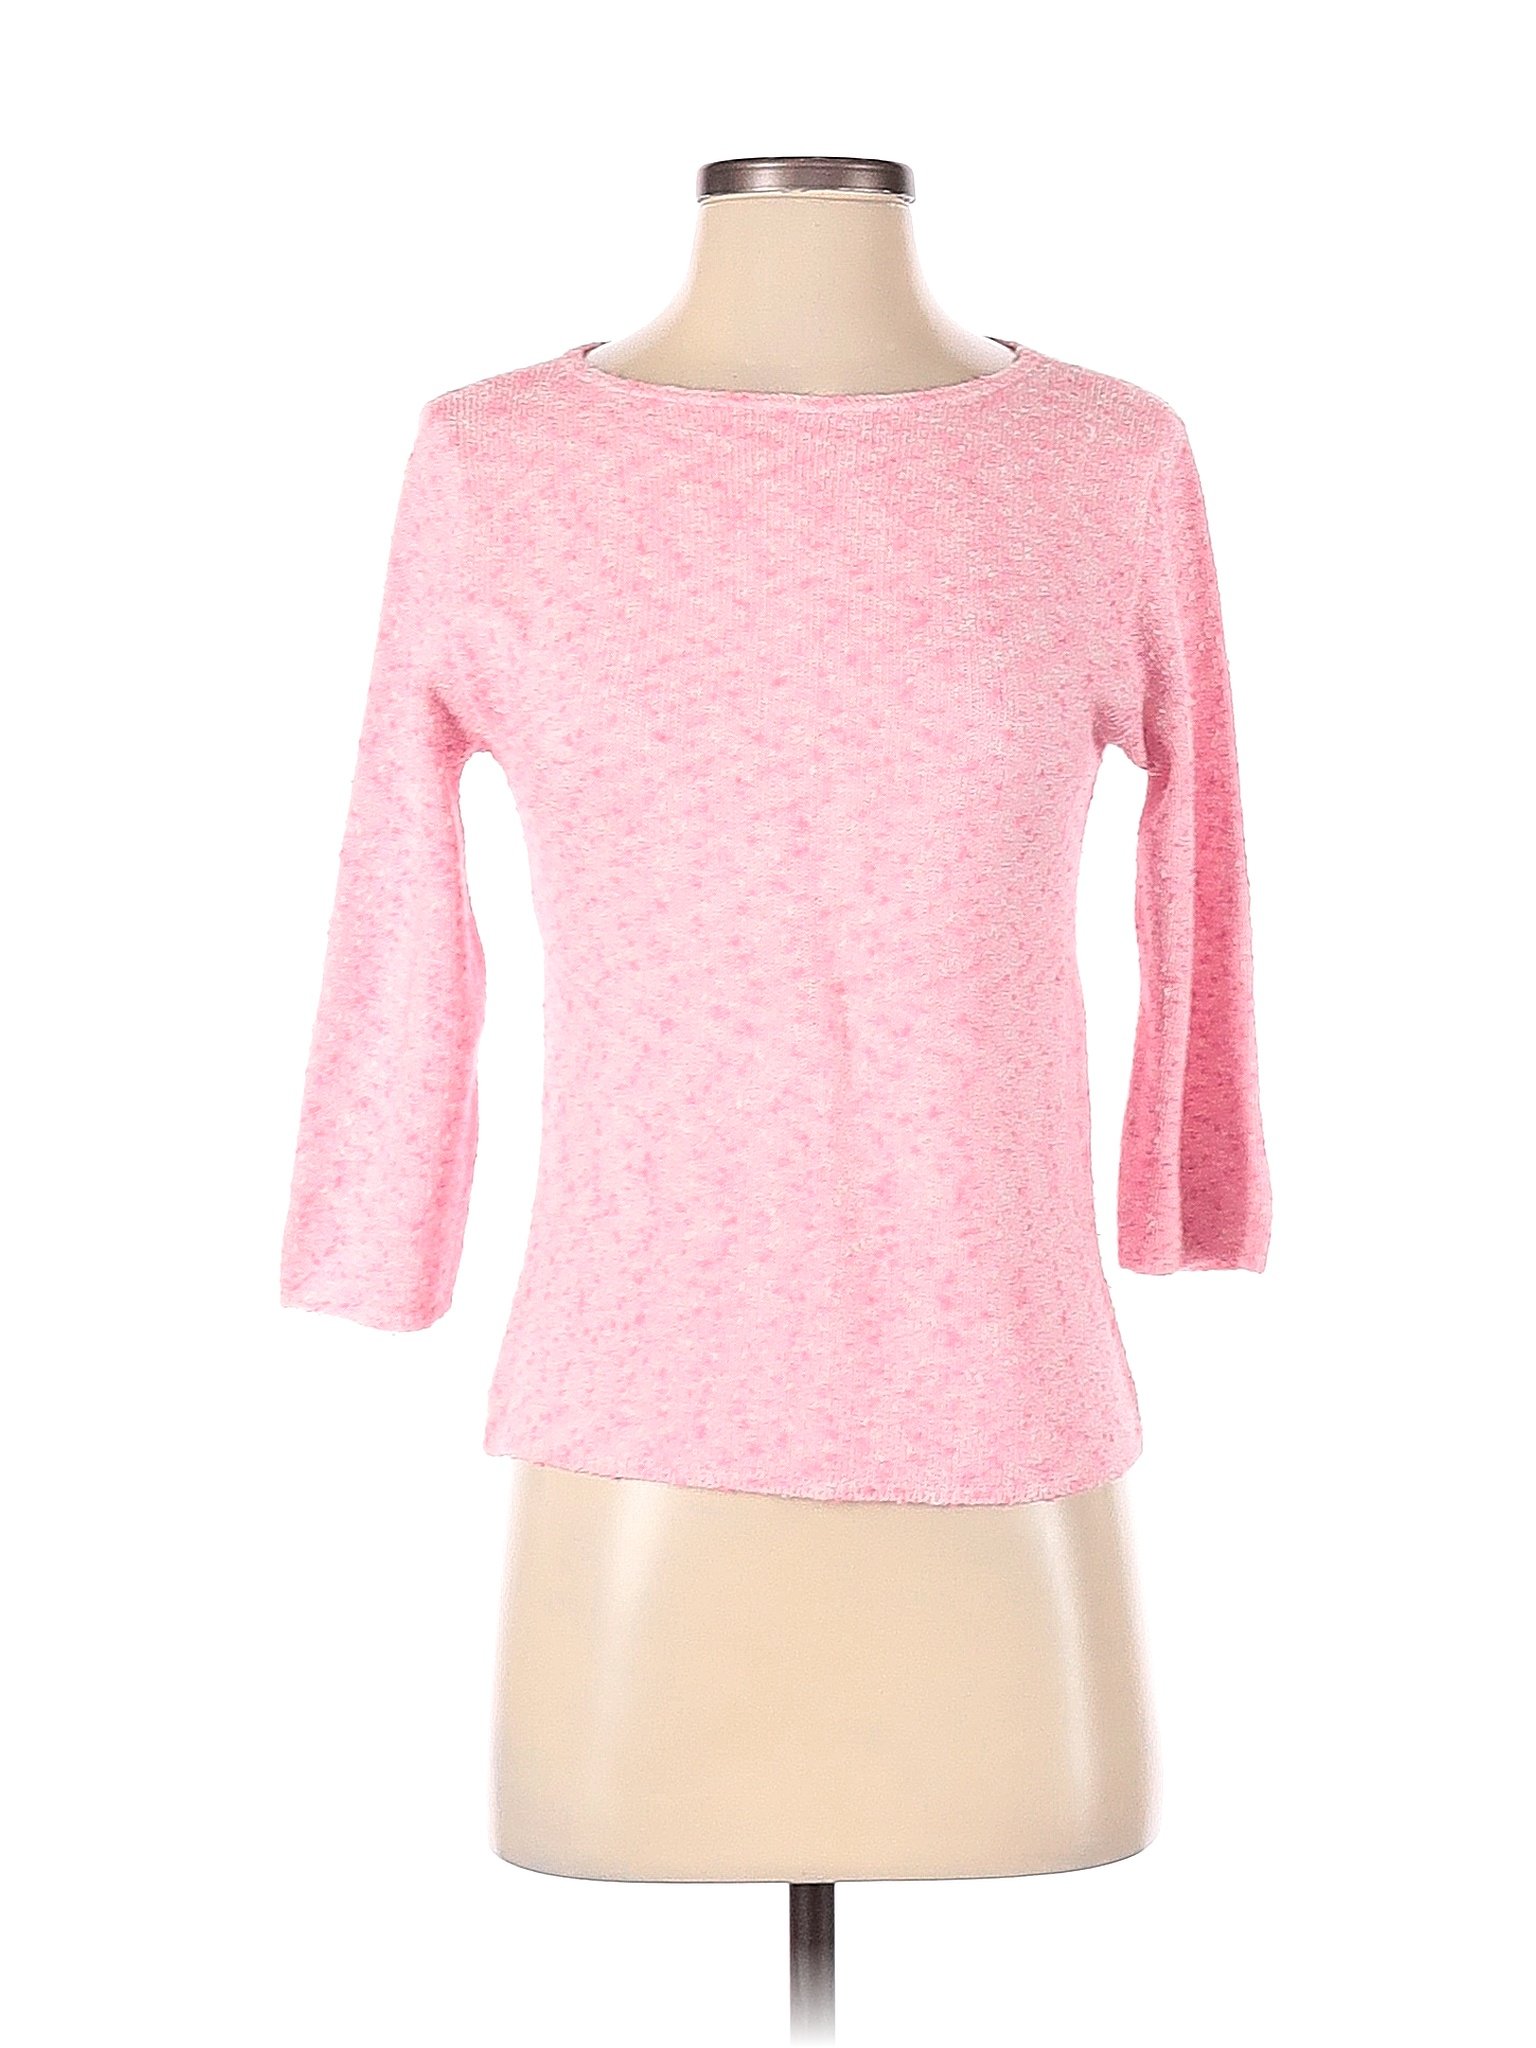 AVALIN 100% Acrylic Solid Color Block Colored Pink Pullover Sweater ...